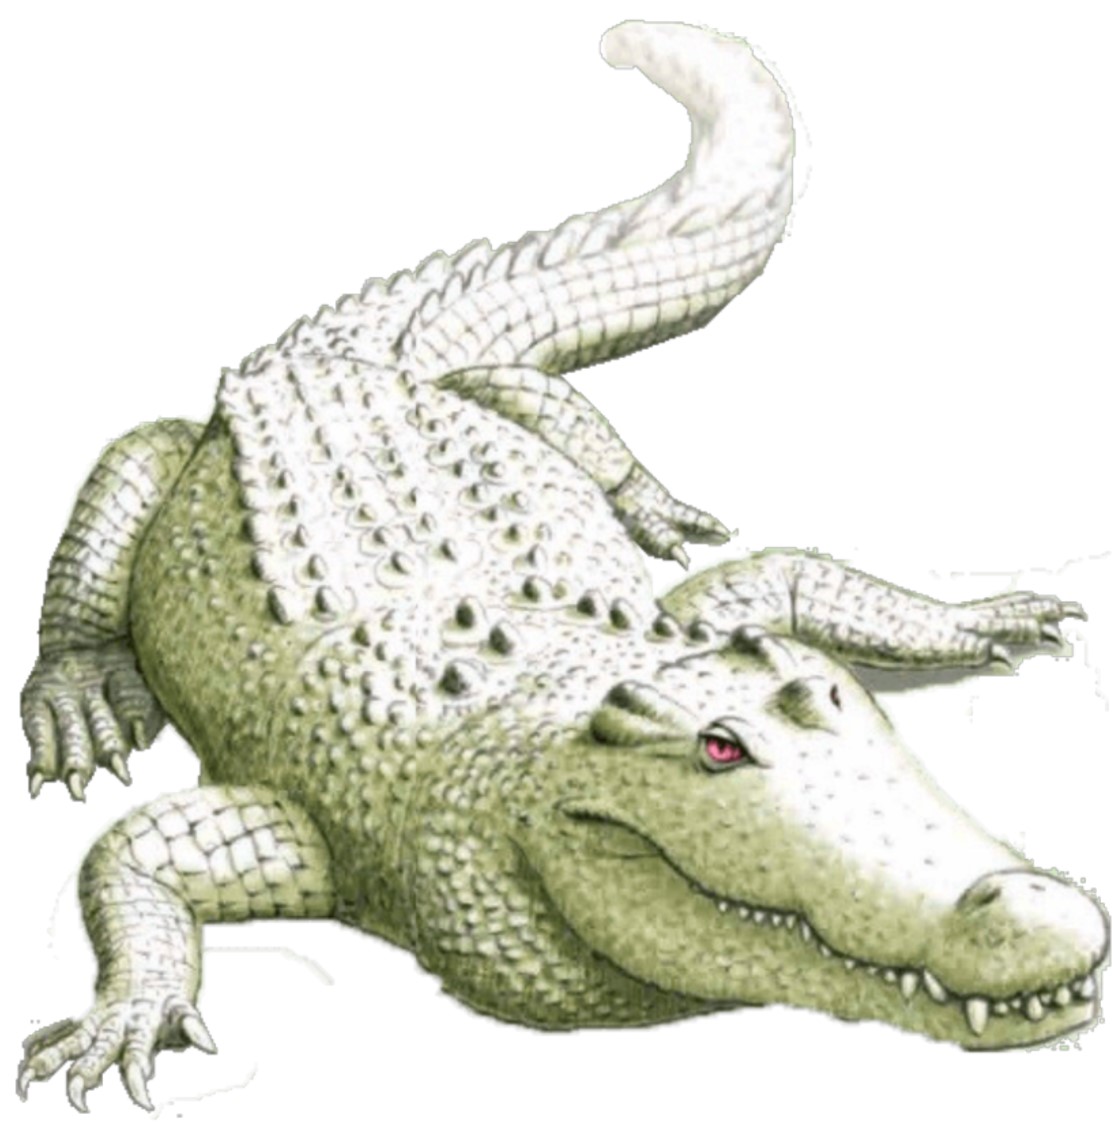 why does carter kane go to find the crocodile in demigods and magicians